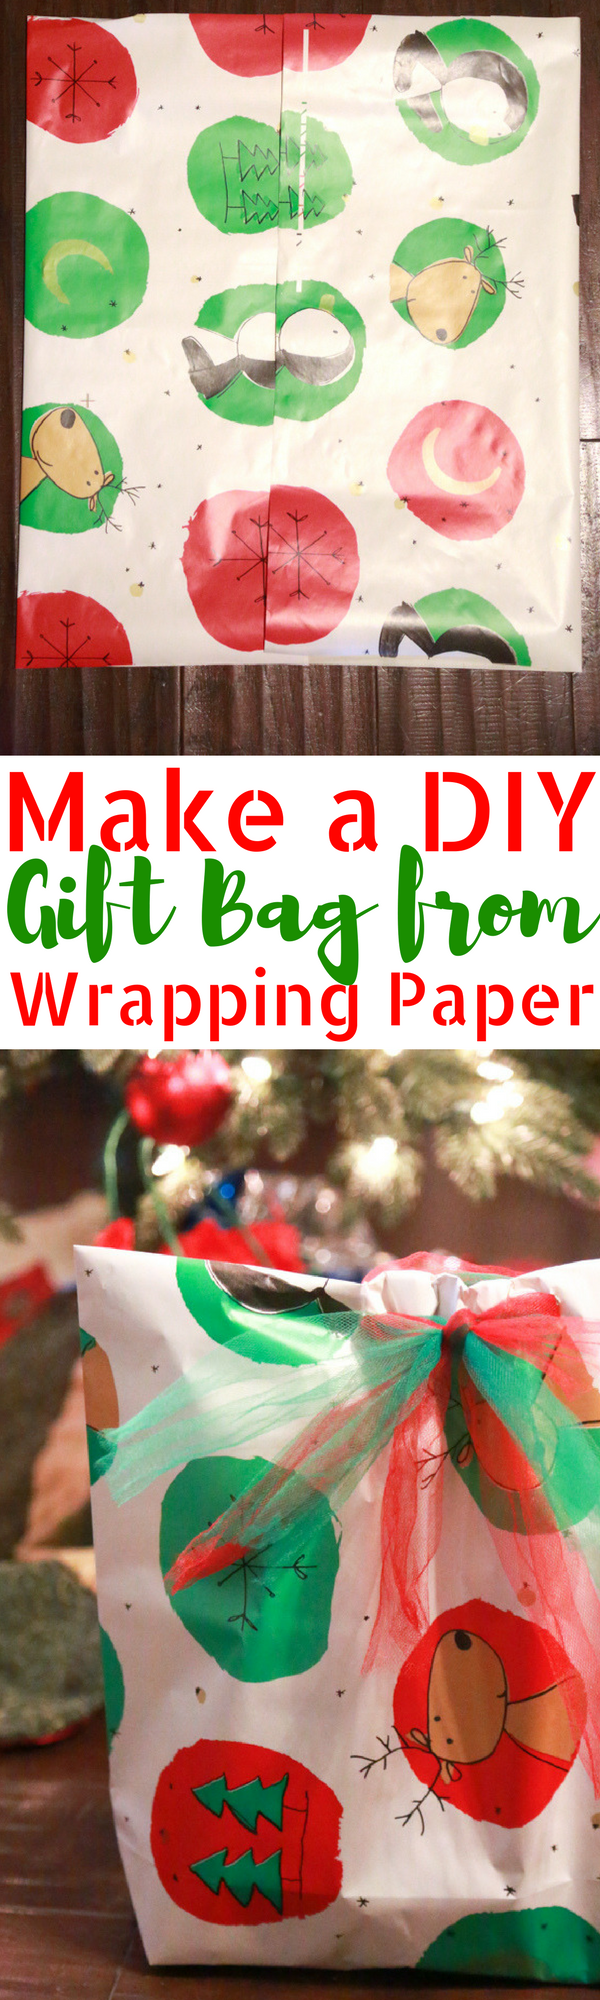 DIY Gift Bag from Wrapping Paper